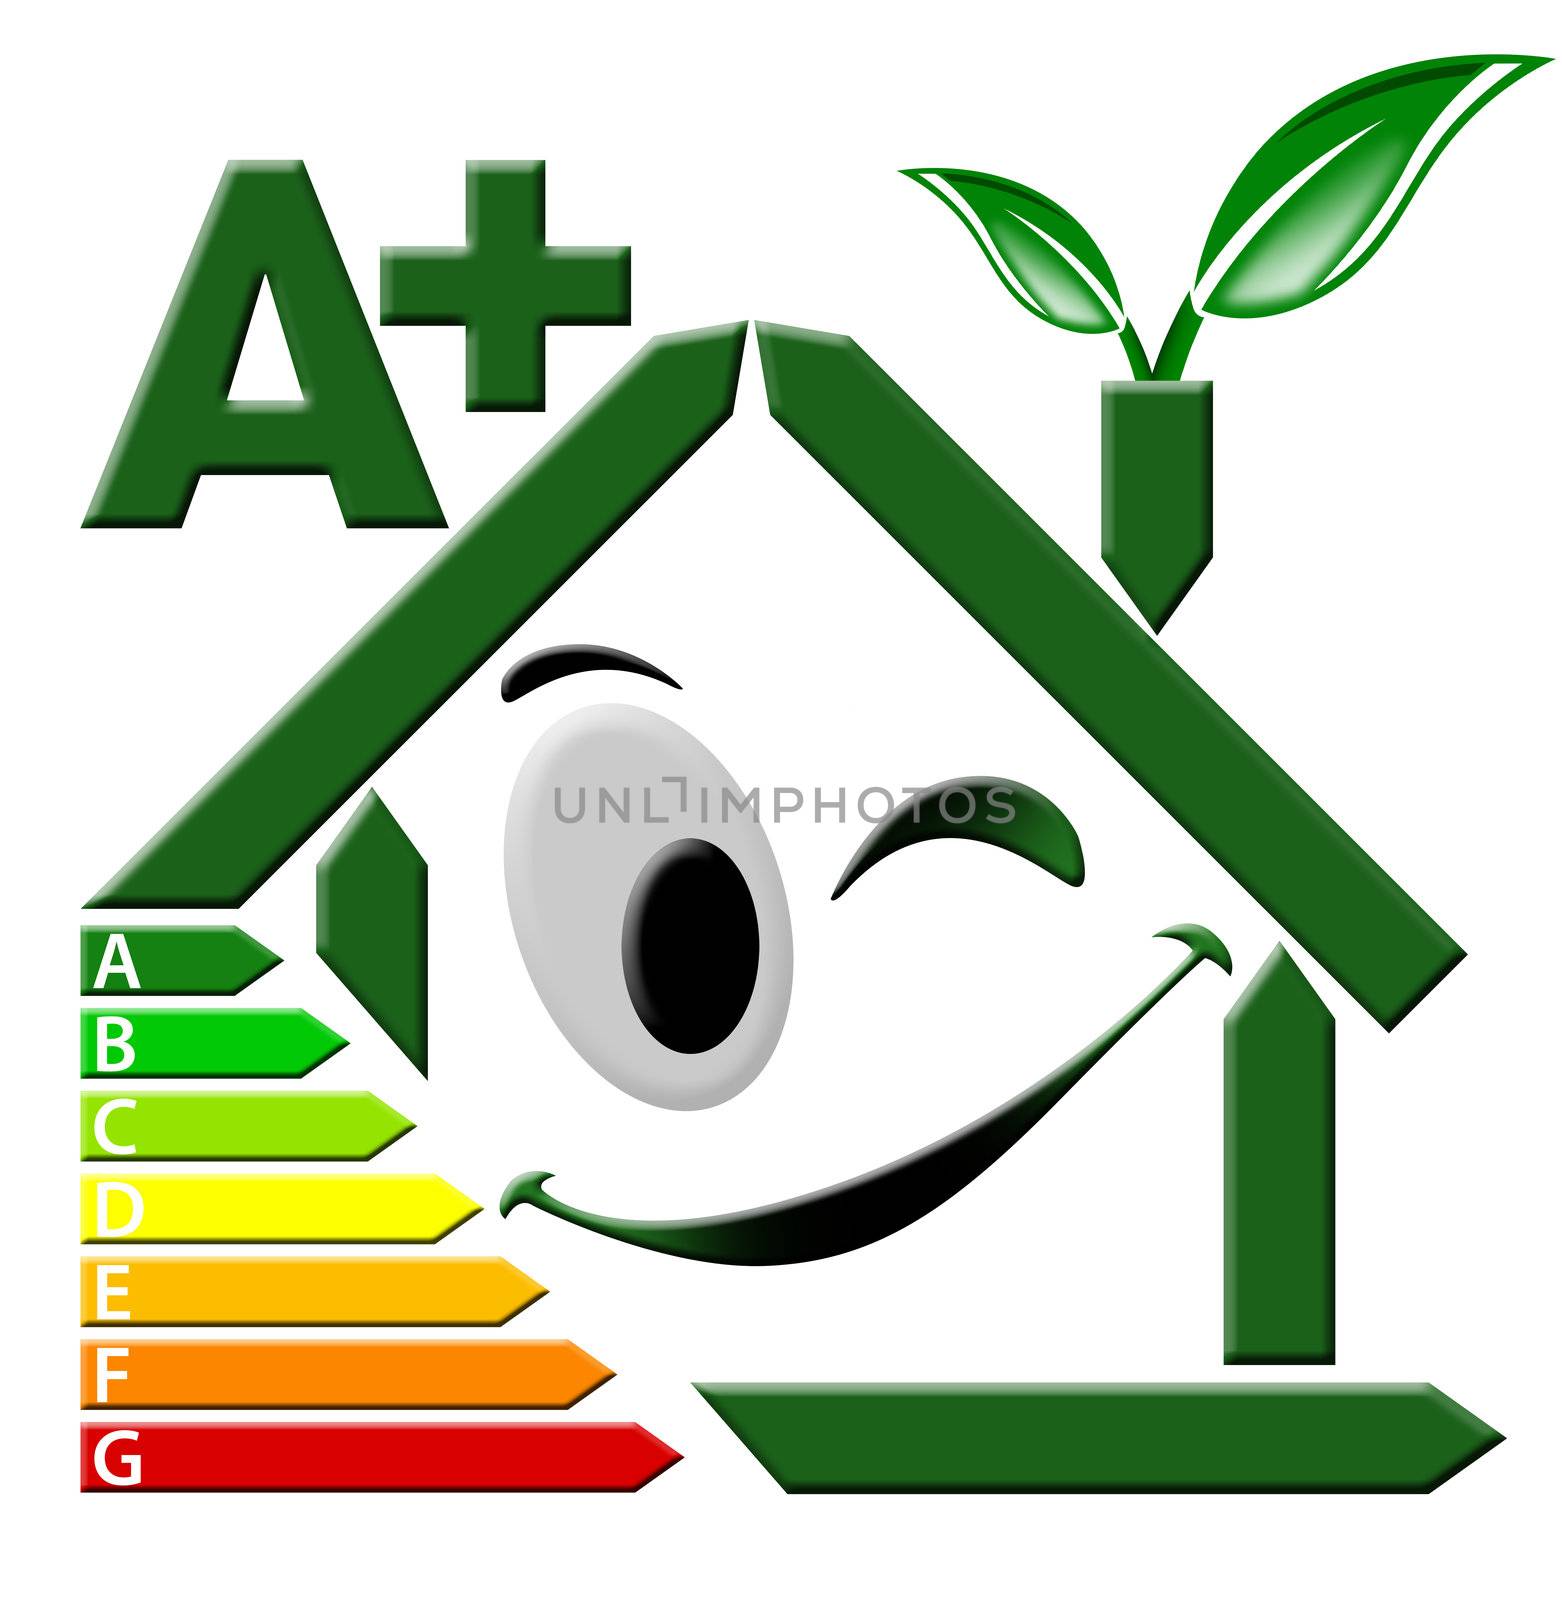 Green house stylized with certification electric output A+